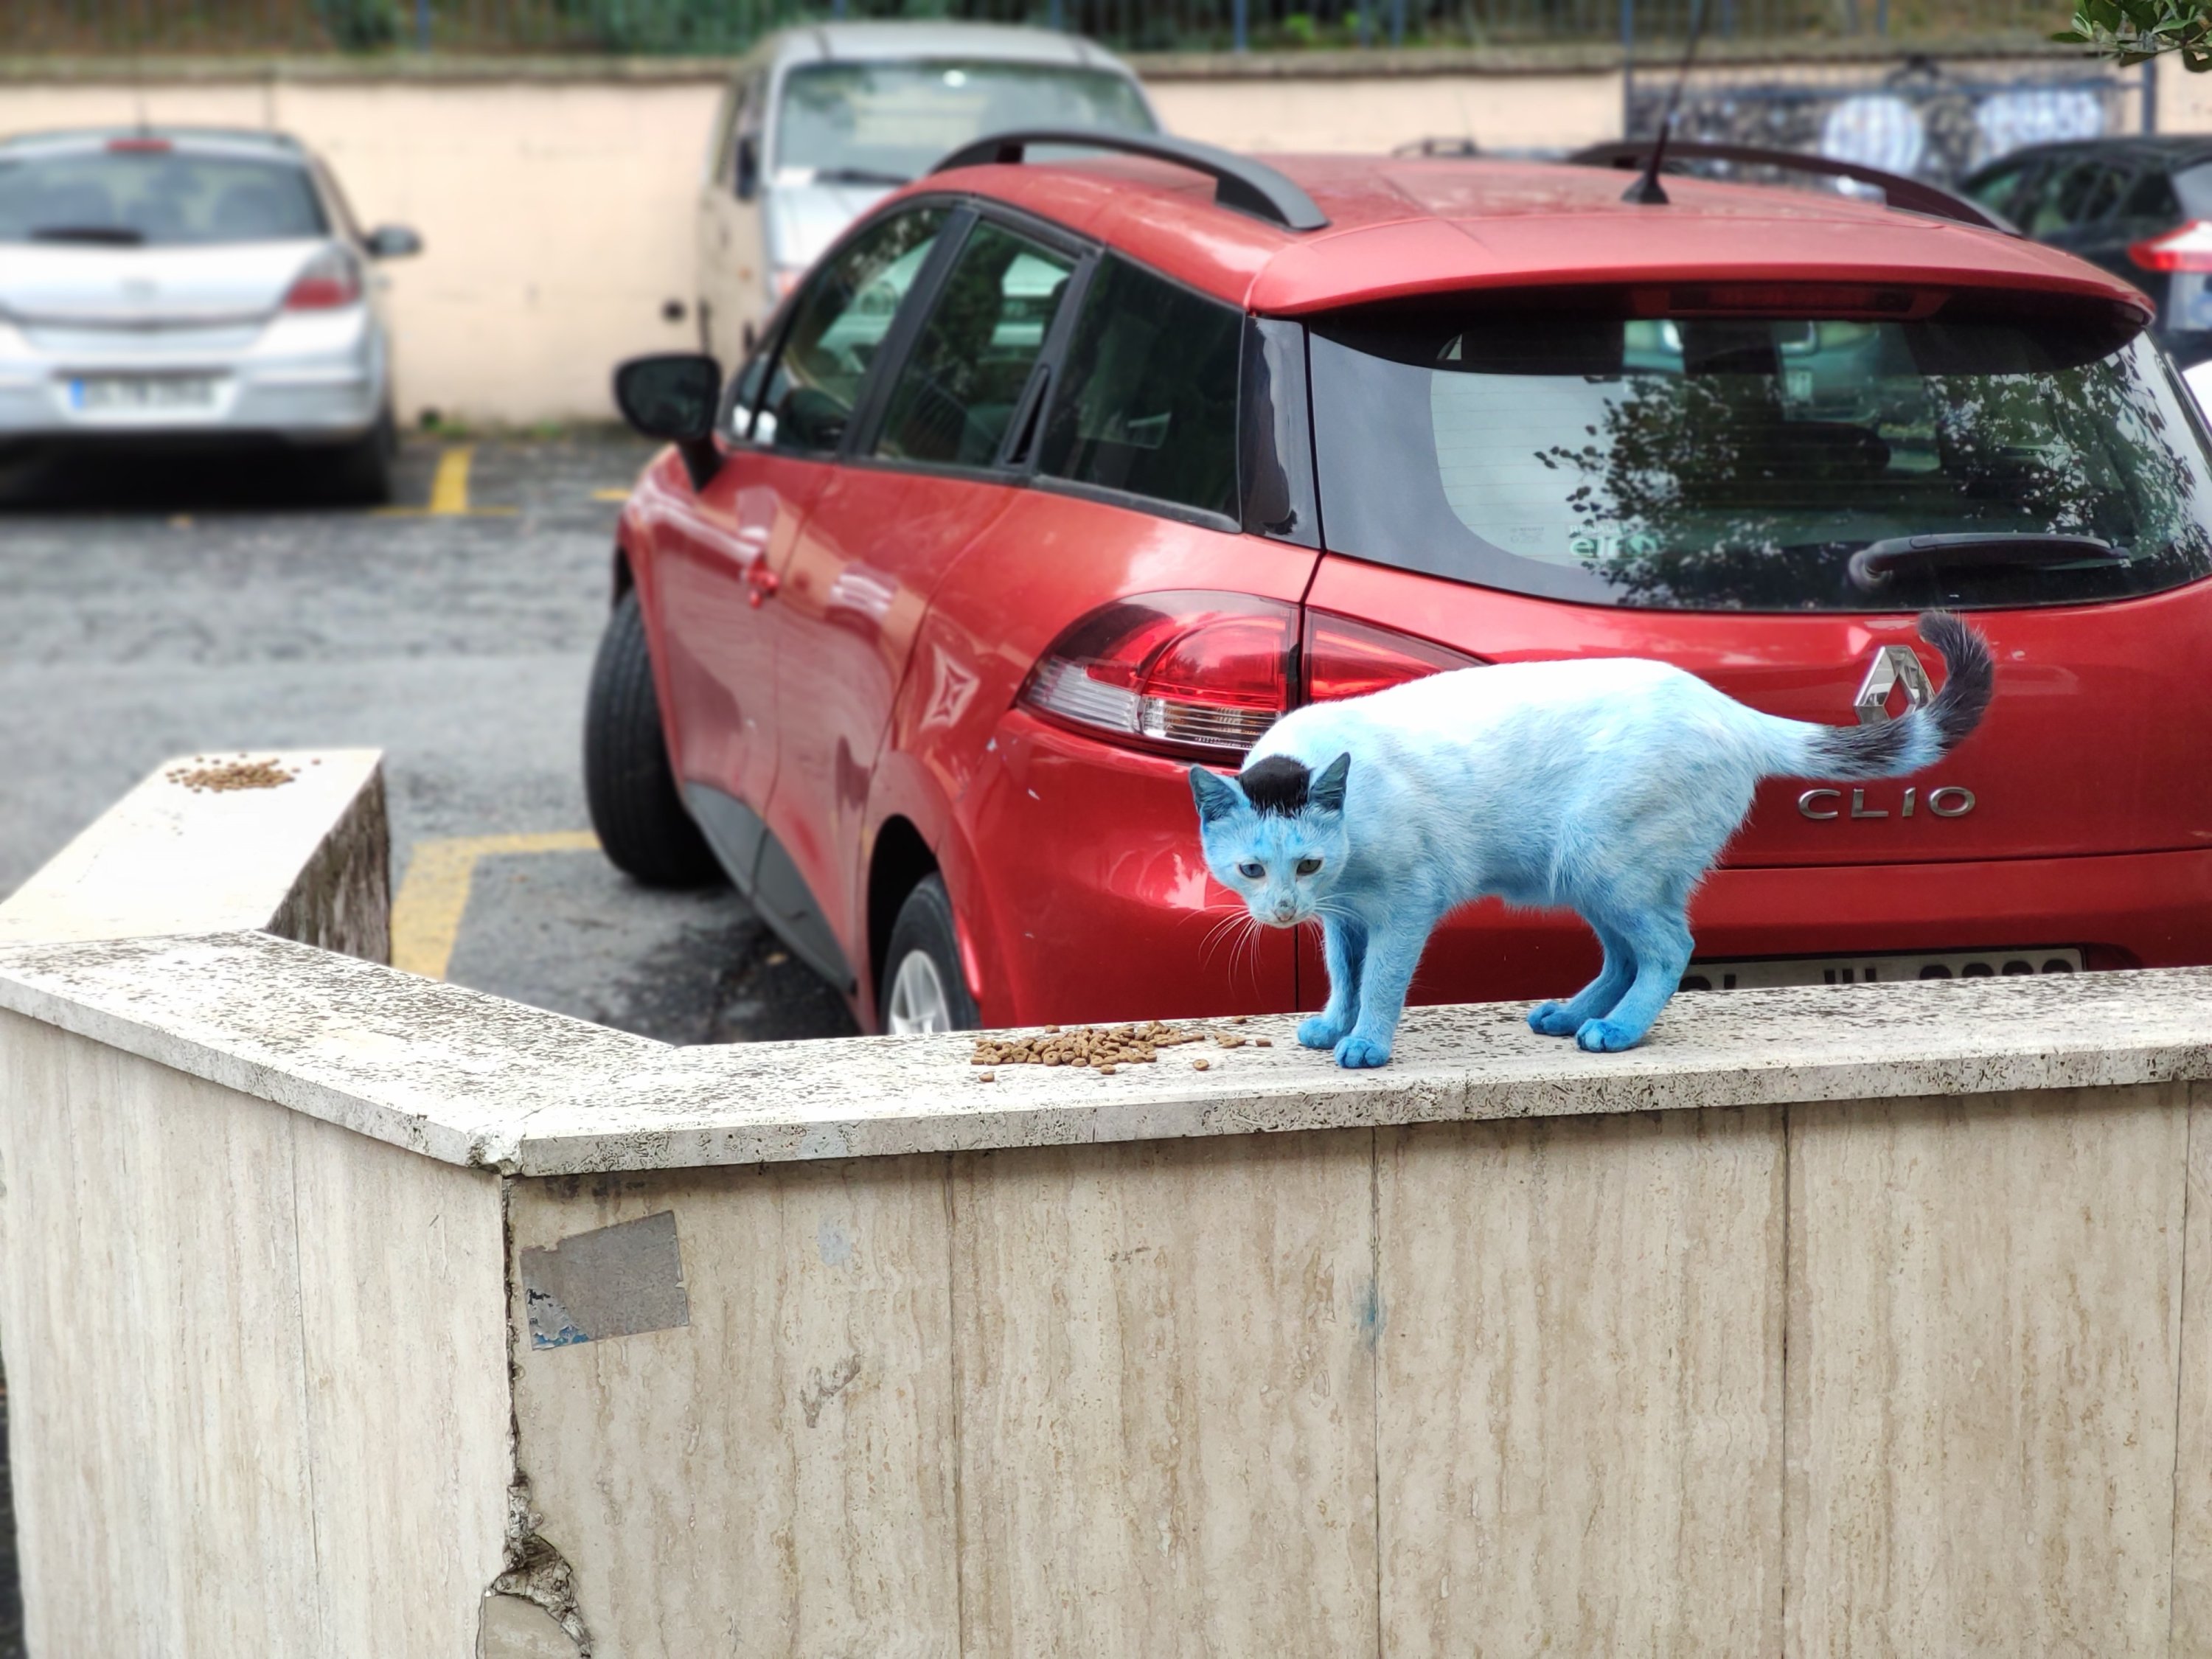 The blue cats spotted in Istanbul